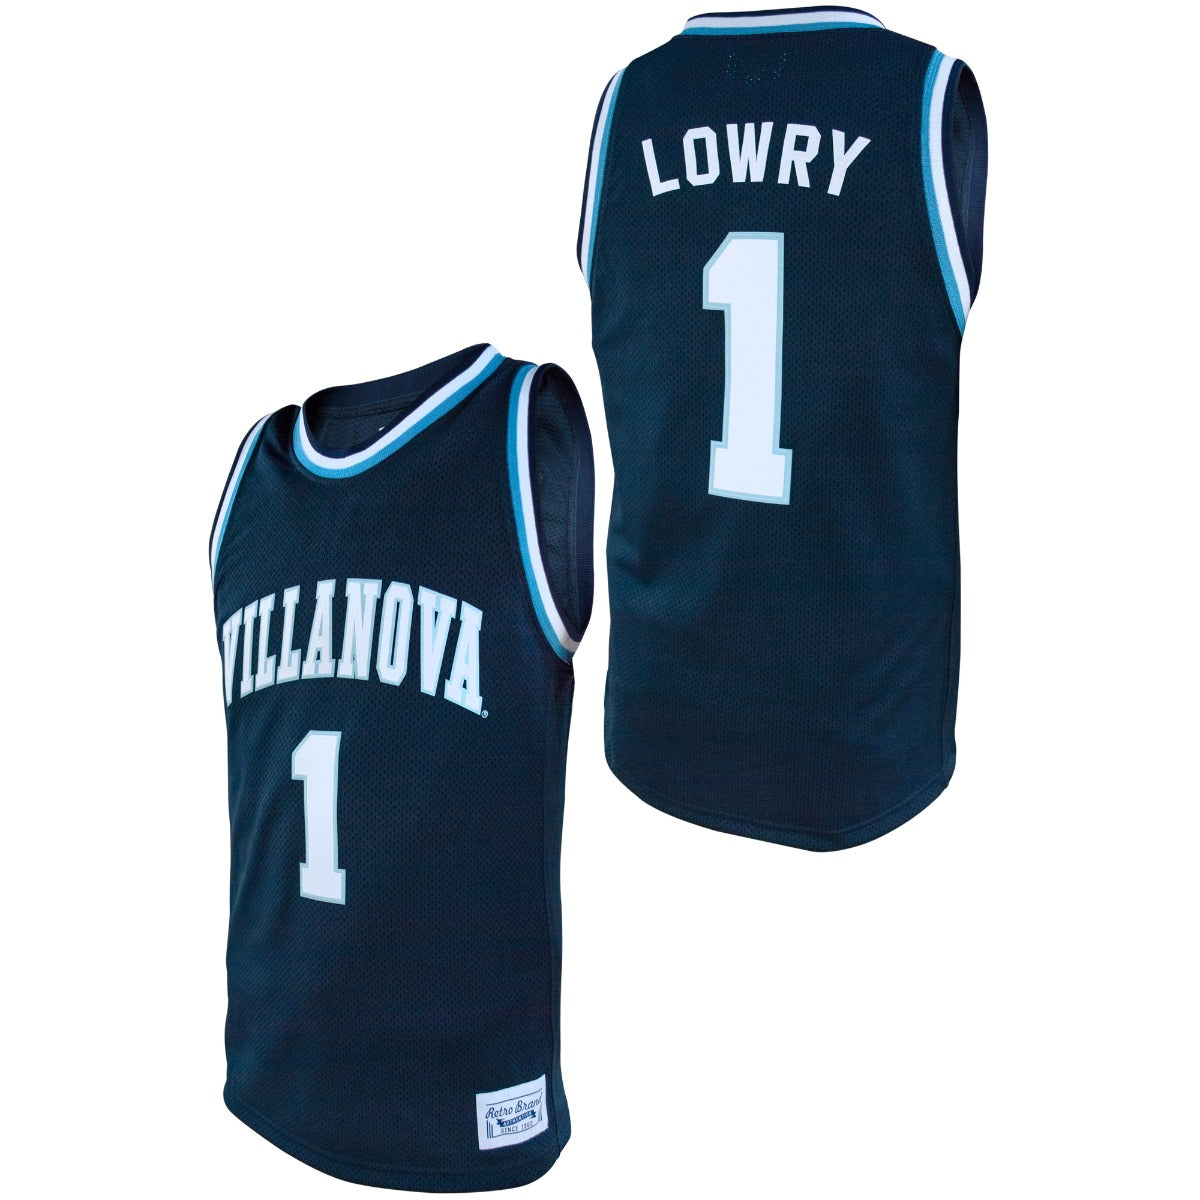 NBA Throwback Jersey Gift Guide For All 30 Teams - Page 29